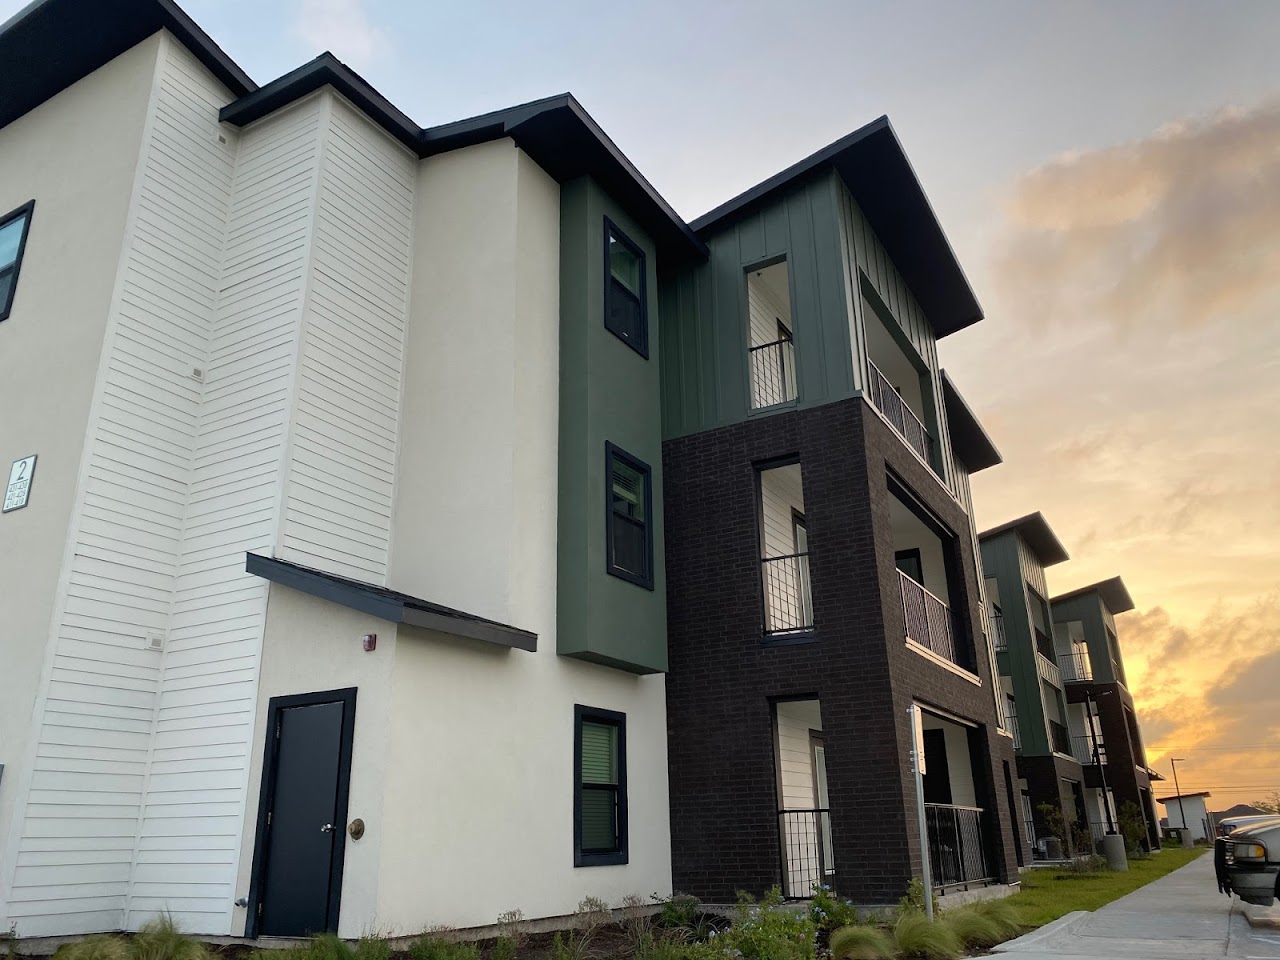 Photo of AVANTI AT GREENWOOD. Affordable housing located at 6102 GREENWOOD DR CORPUS CHRISTI, TX 78417